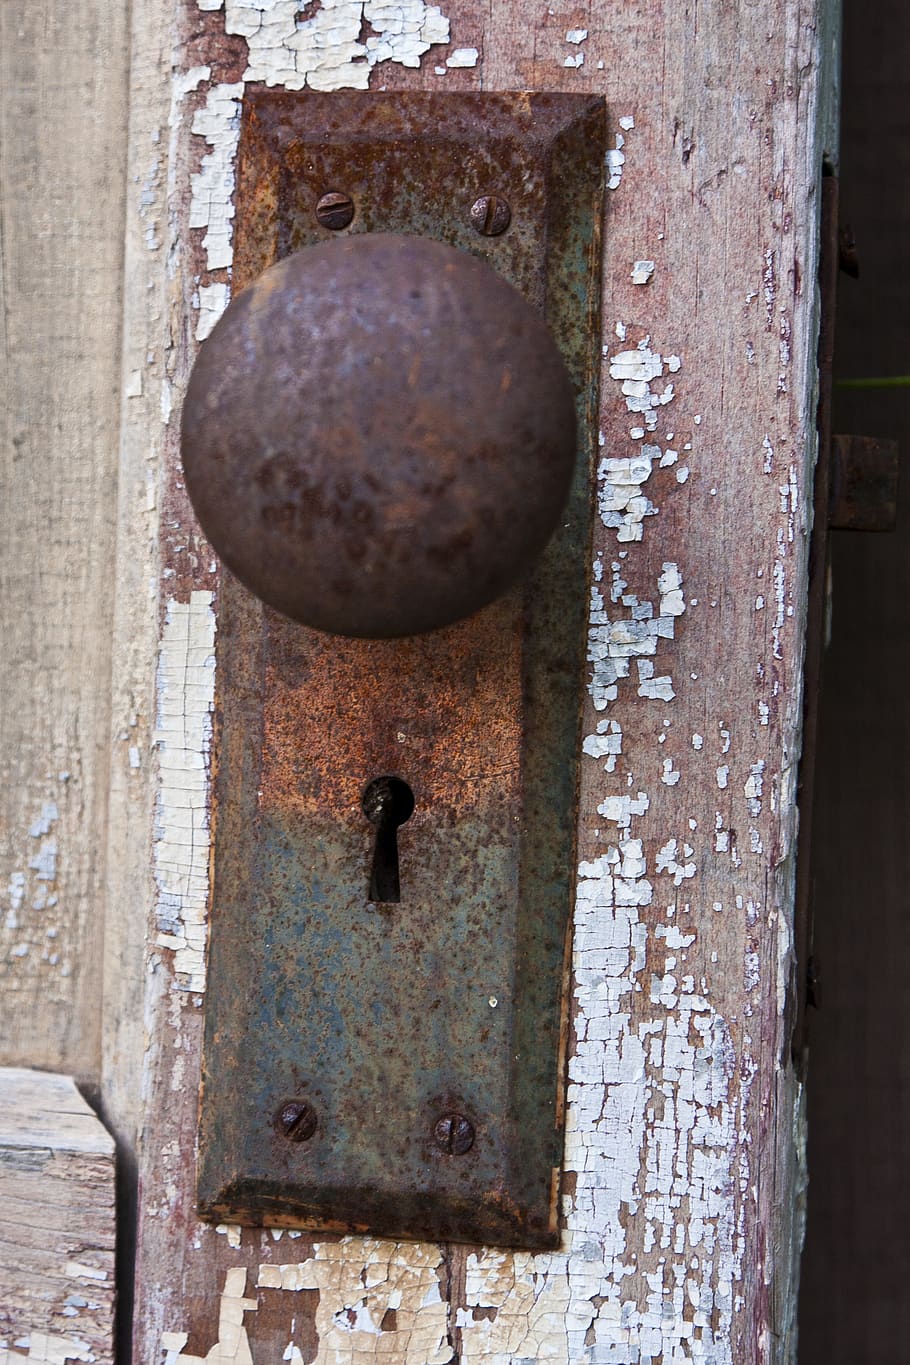 rust, door handle, architecture, lock, key hole, antique, aged, rusty, metal, old